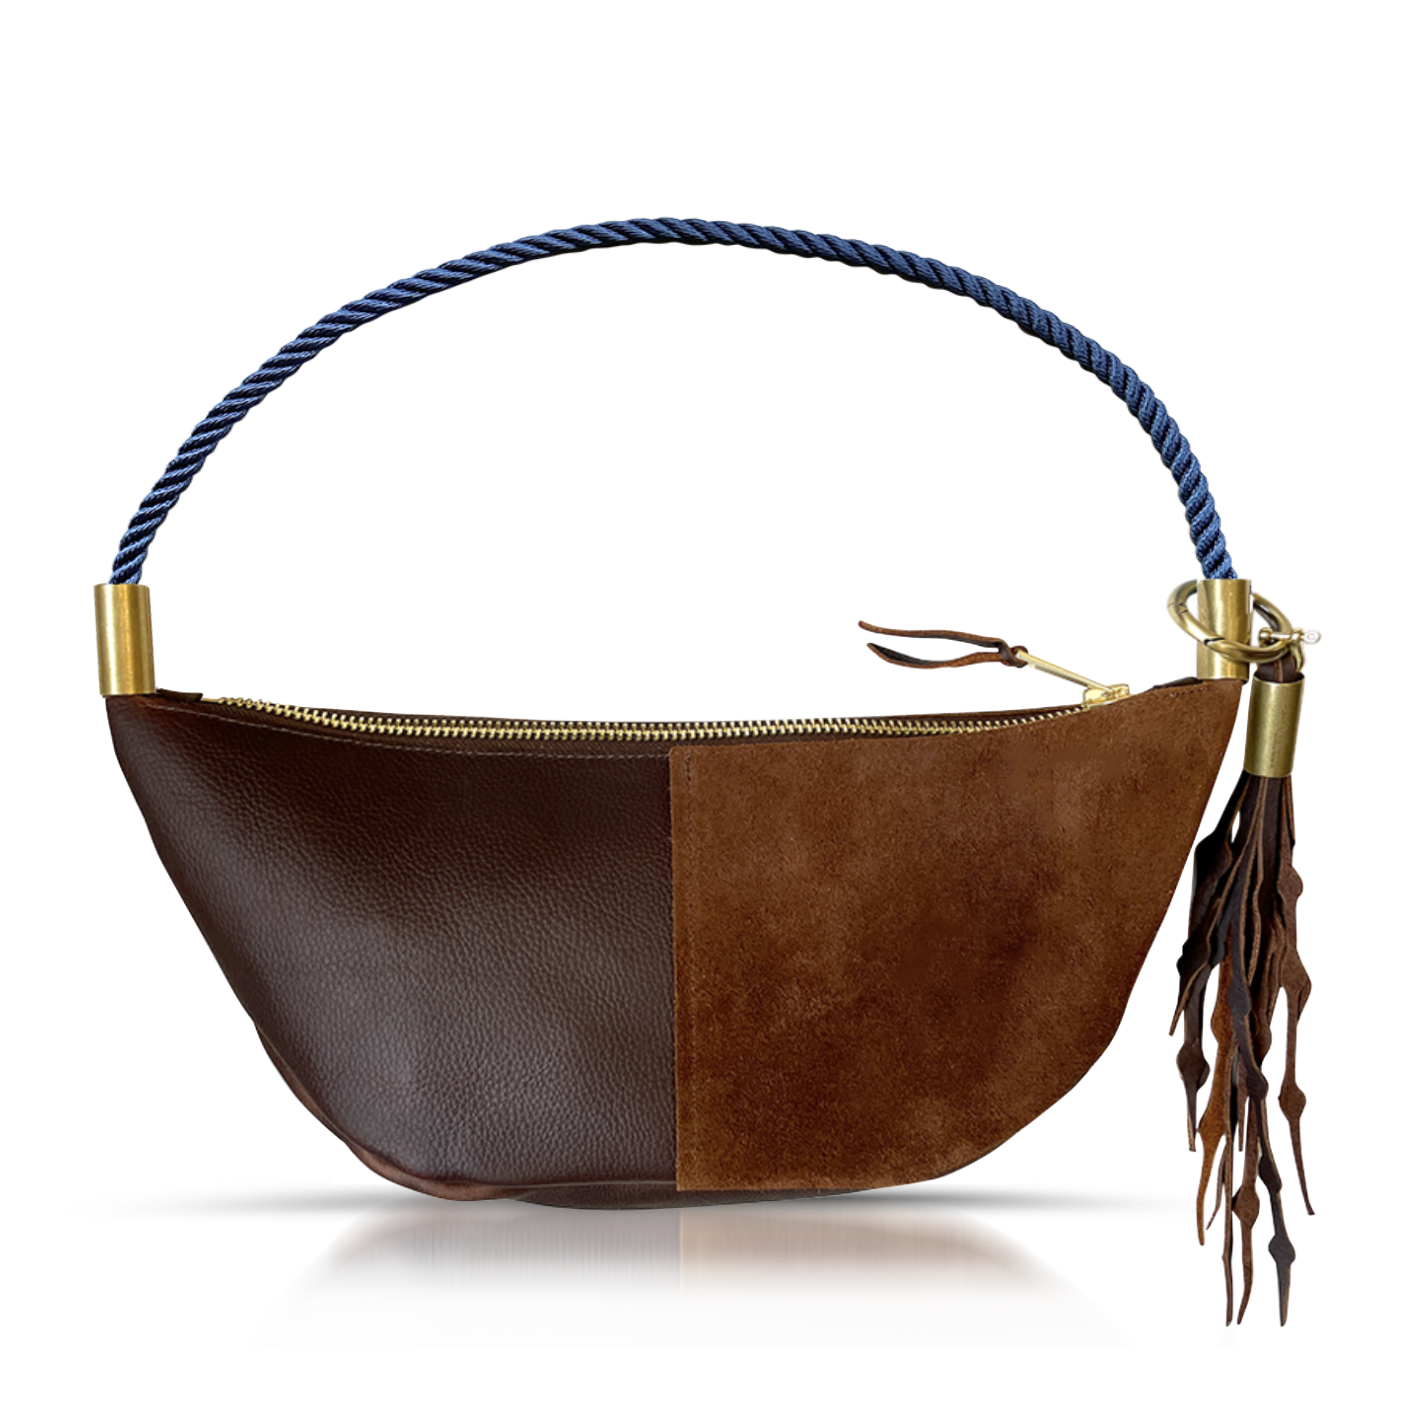 brown leather sling bag with navy dock line